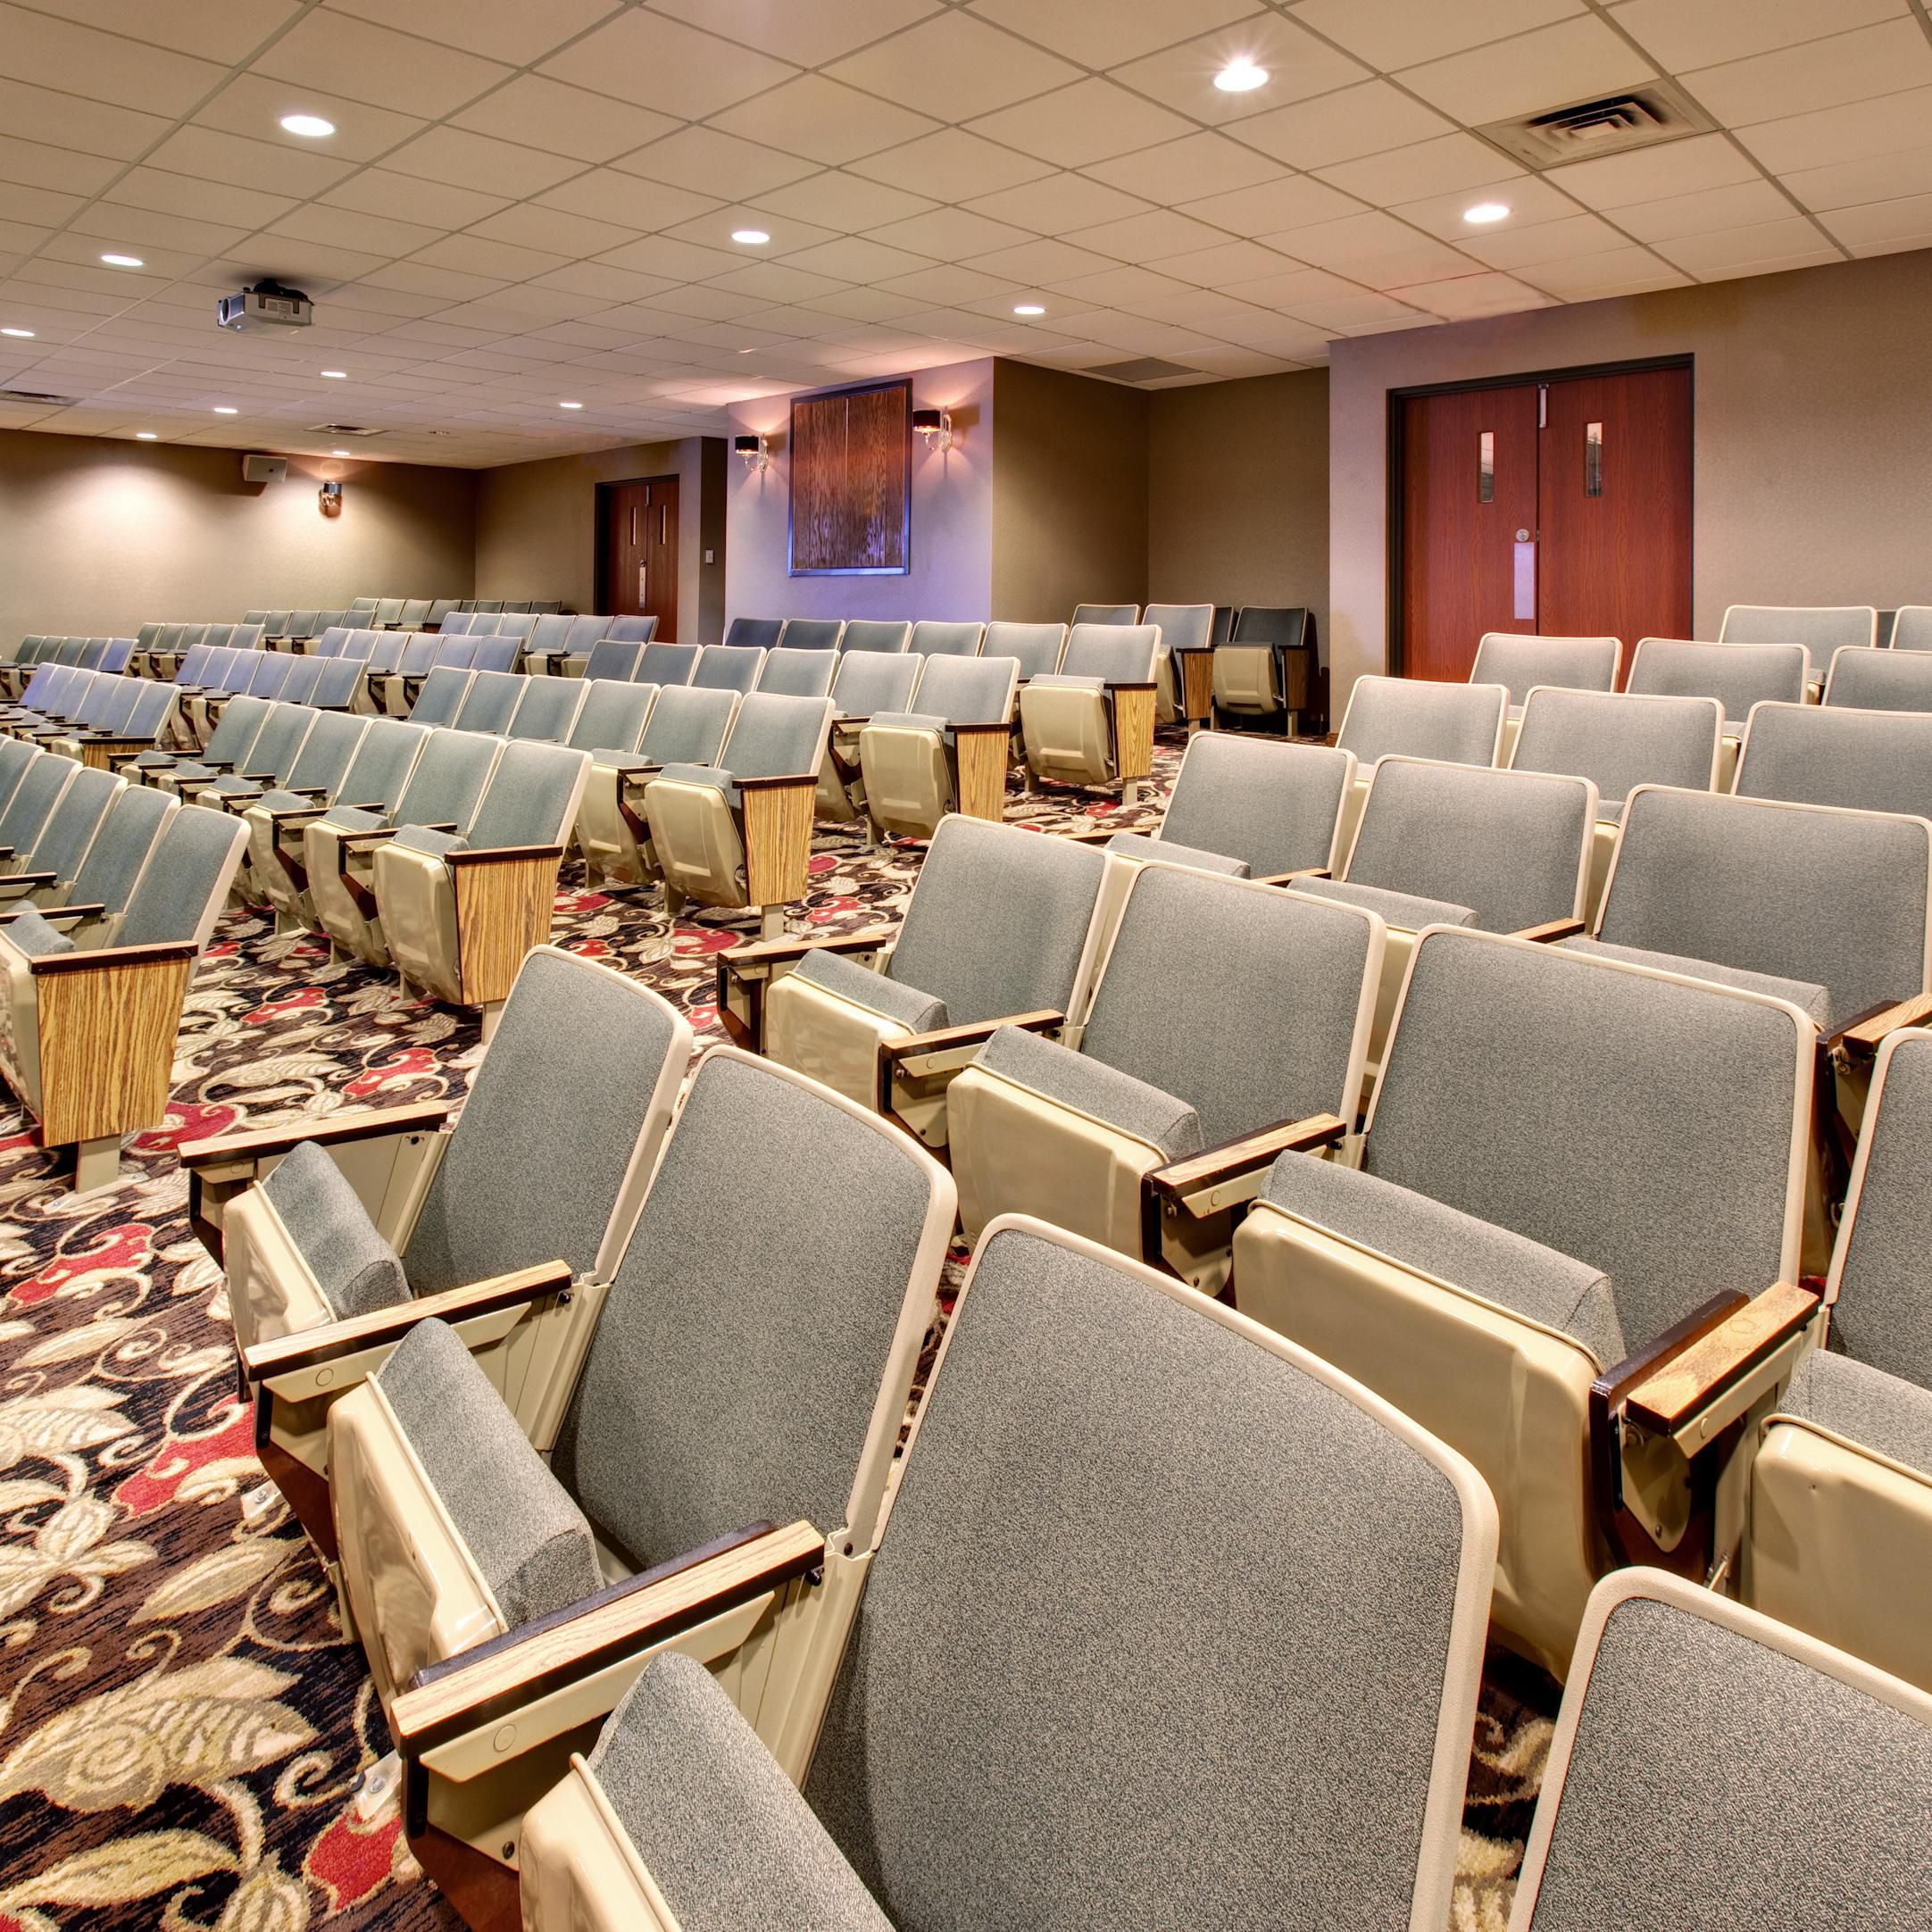 Aviation Theater at the Crowne Plaza hotel near Miller Park